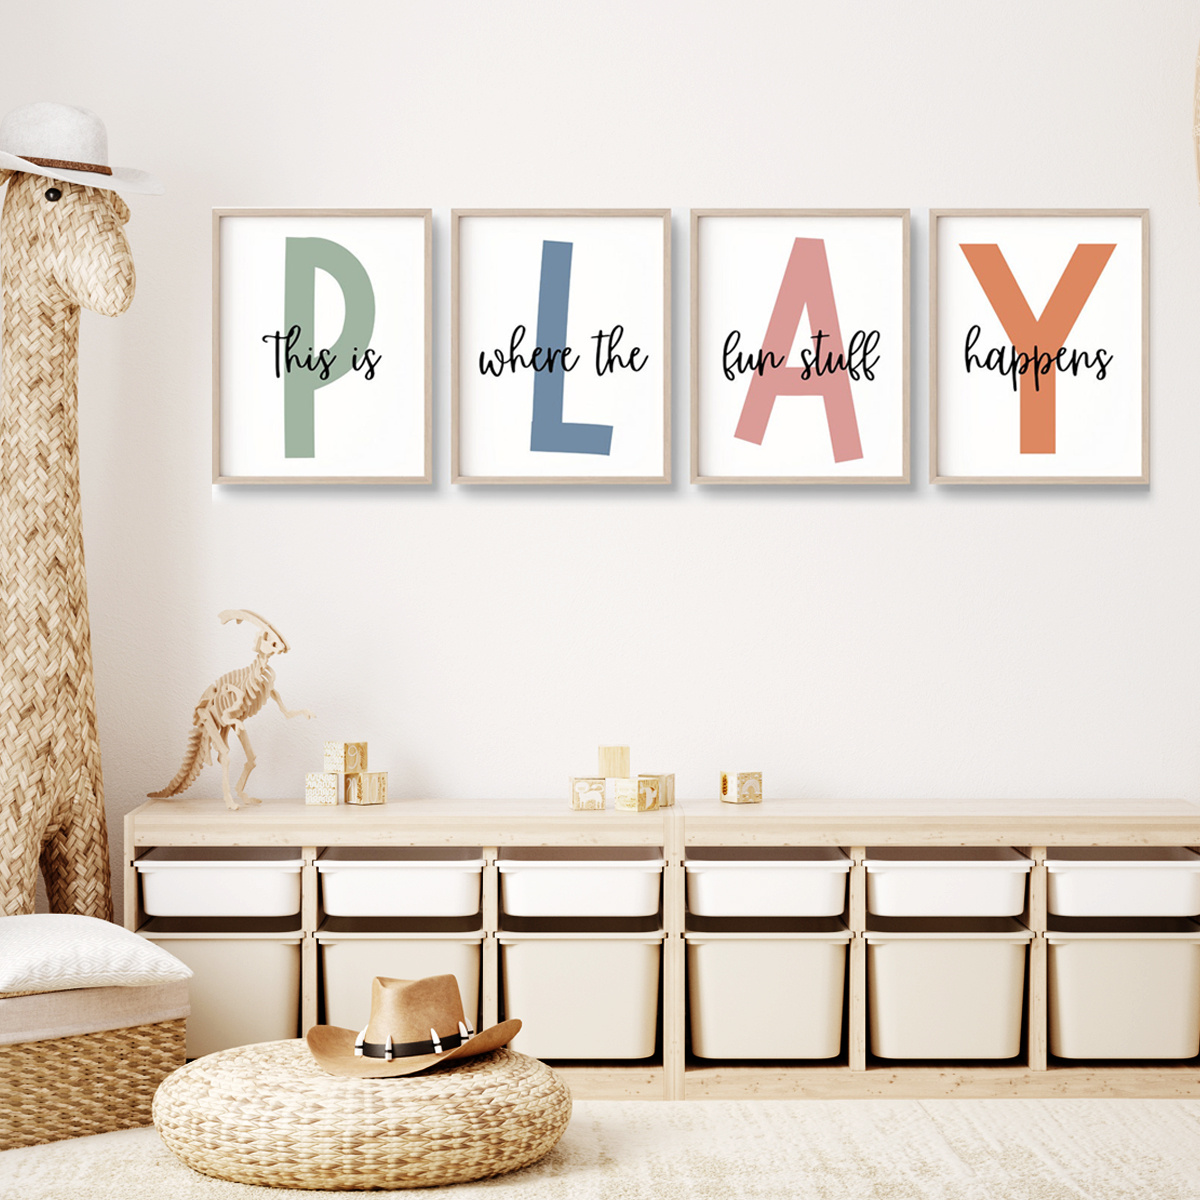 4pcs This Is Where The Fun Stuff Happens Set Of Playroom Prints, Playroom  Wall Decor, Nursery Wall Art, Play Sign, Kids Room Decor, Let's Play Sign